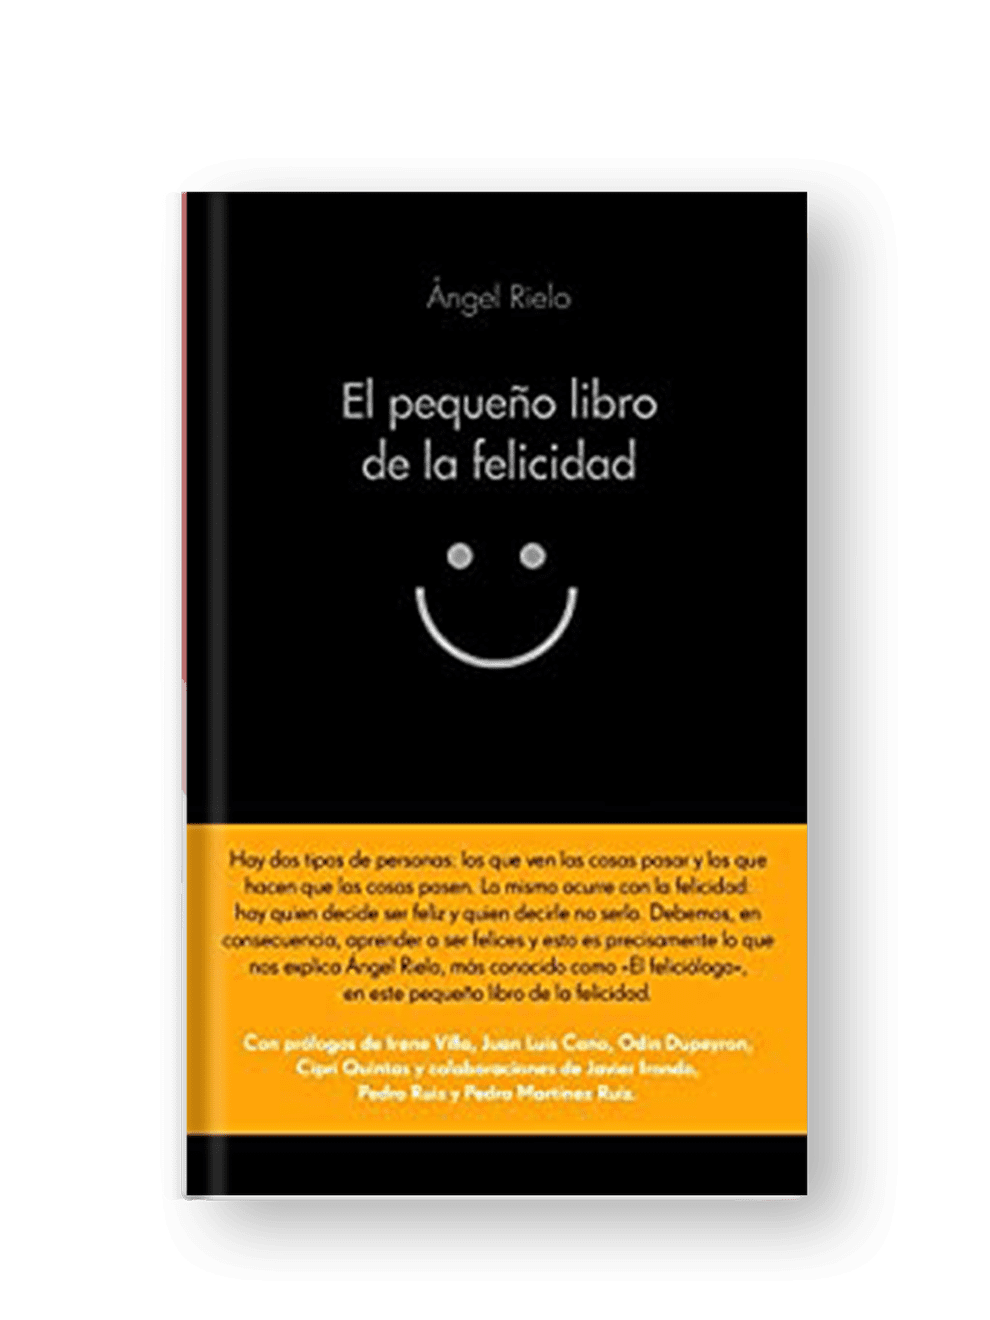 https://www.angelrielo.com/wp-content/uploads/2021/11/PEQUENO-LIBRO-FELICIDAD-990x1320.png